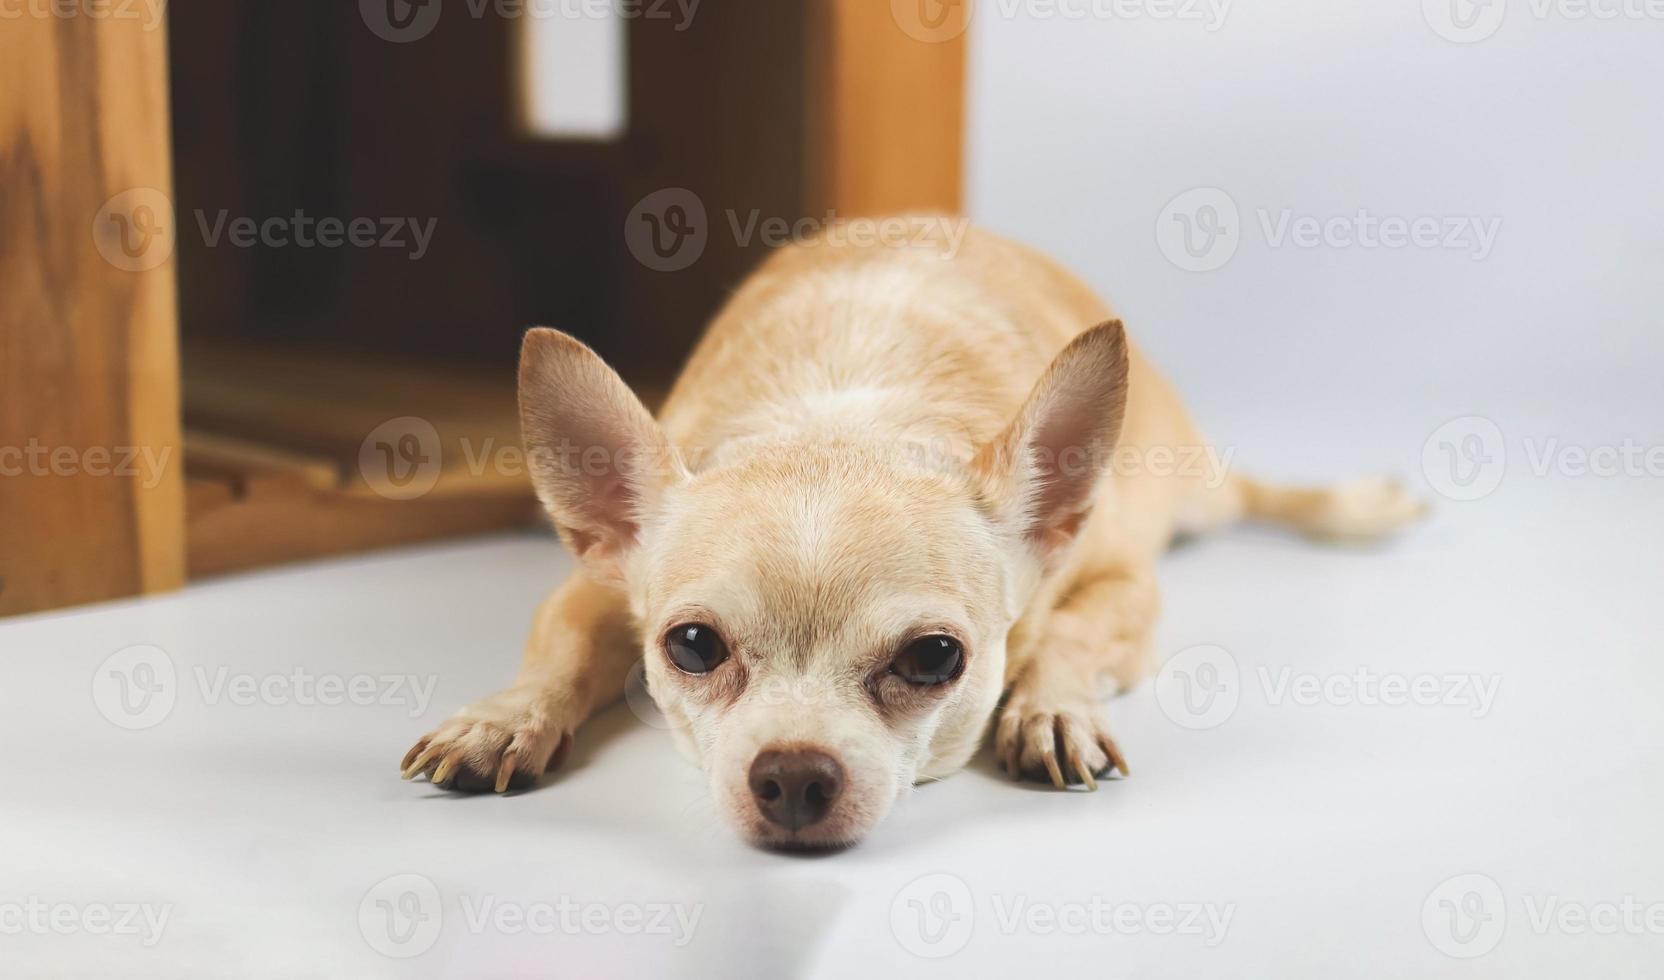 leepy brown  short hair  Chihuahua dog lying down in  front of wooden dog house, isolated on white background. photo